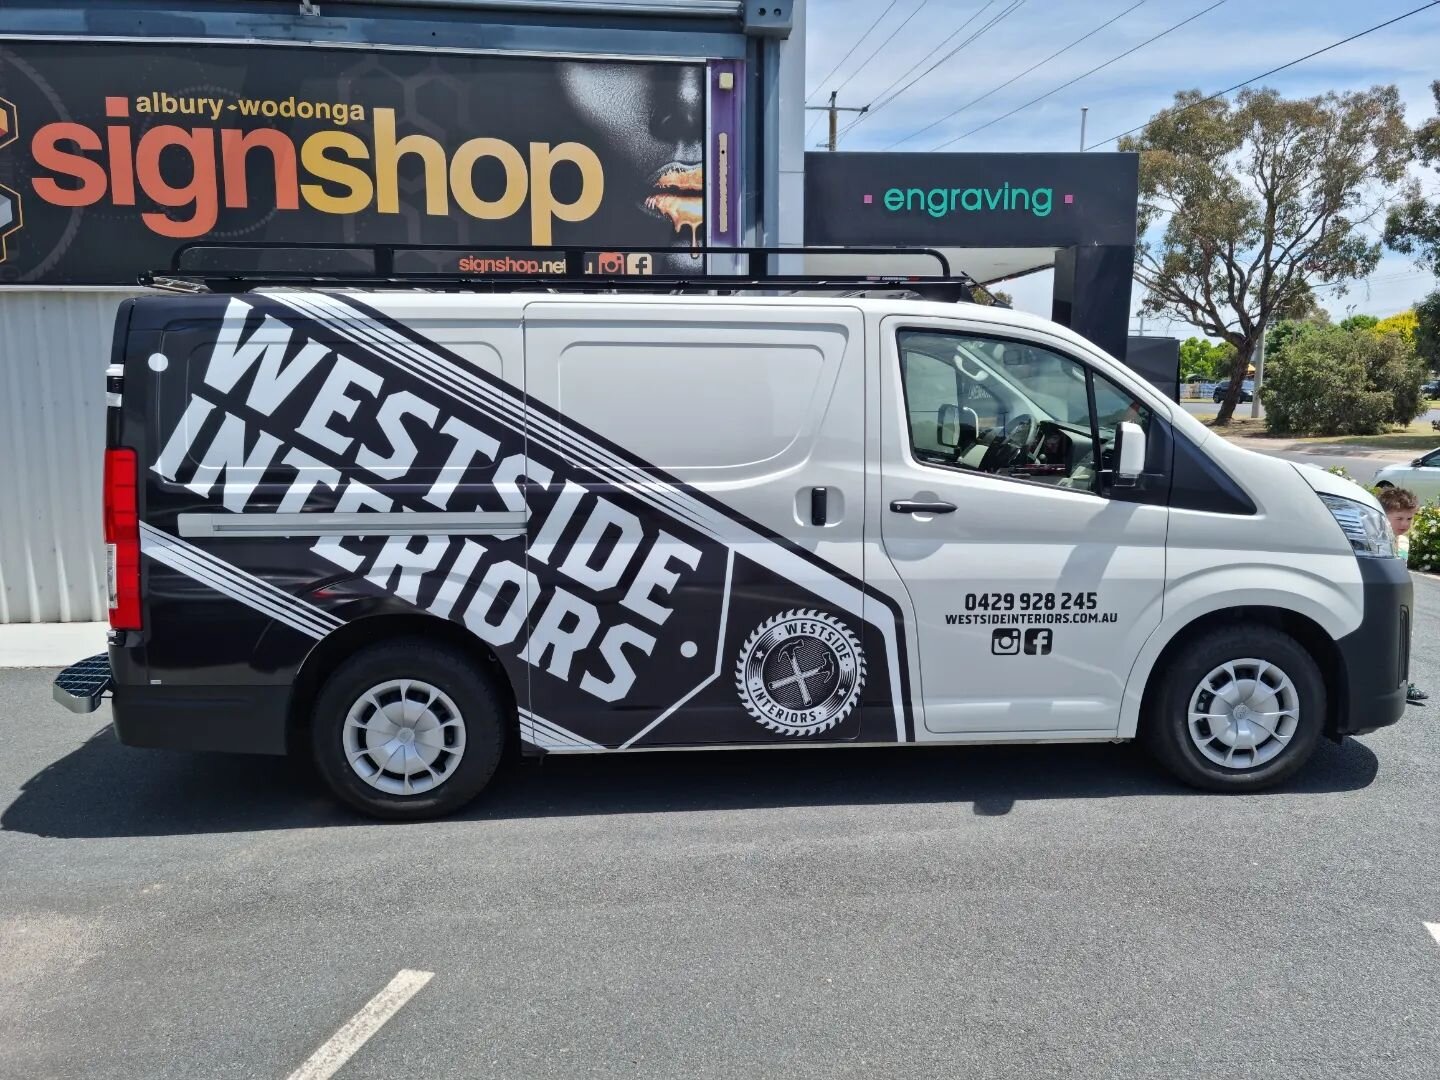 Van is all wrapped and ready for work, give us a call if you need any work doing in the Albury Wodonga area #albury #alburywodonga #carpentryandjoinery #joinery #carpentry #shopfitting #bitcoin #btc #bitcoinacceptedhere